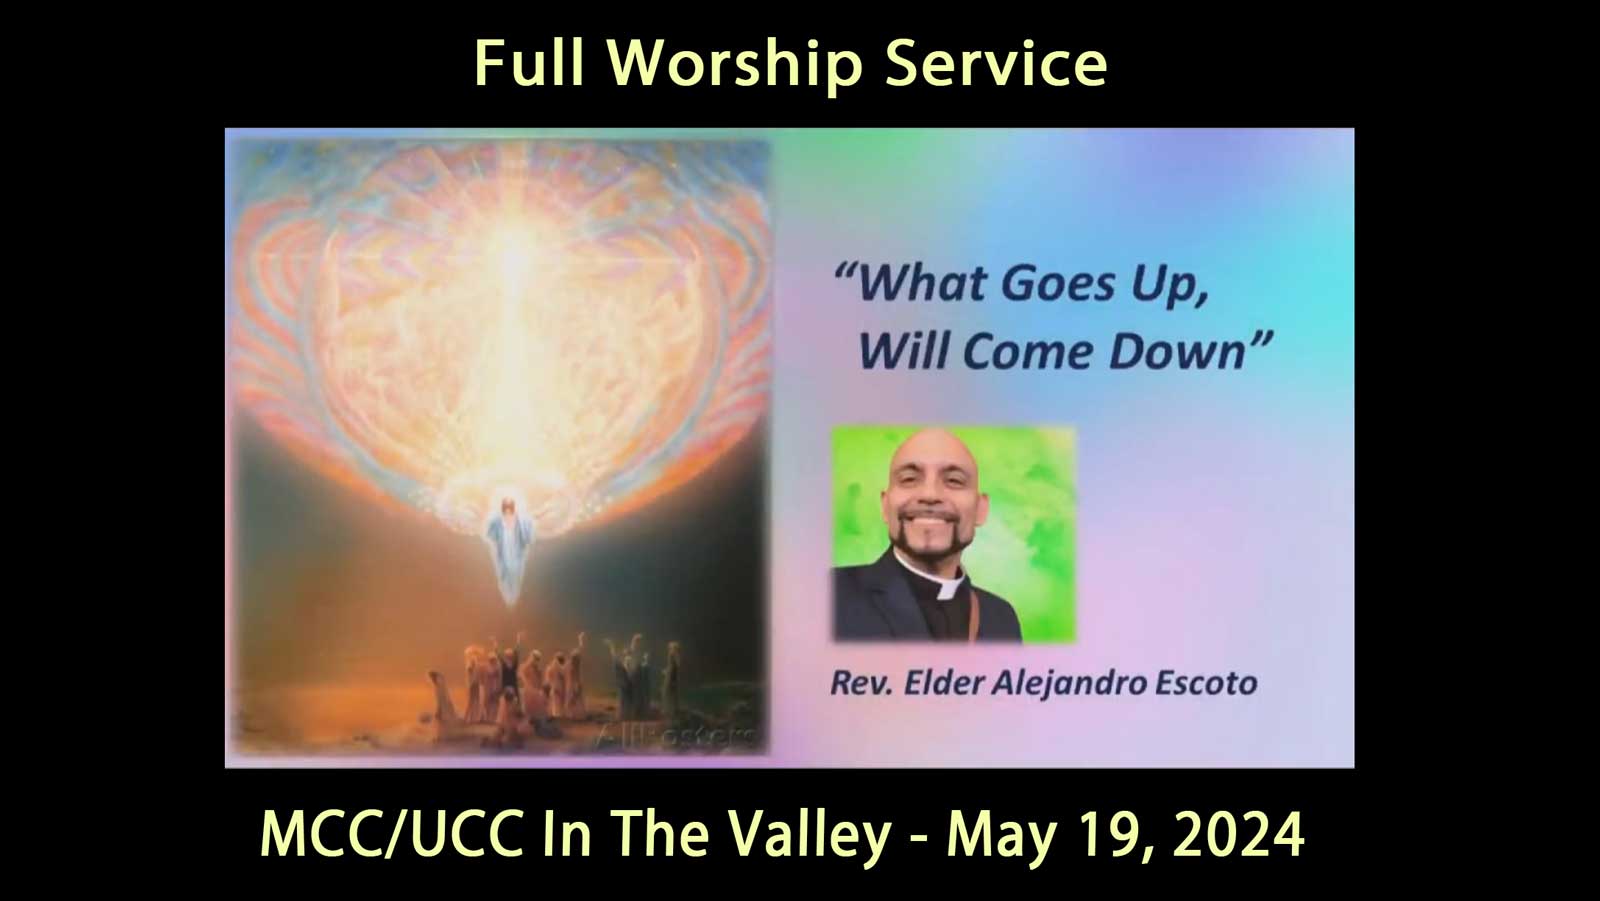 MCC UCC Full Service May 19, 2024 What Goes Up Will Come Down - Rev. Elder Alejandro Escoto